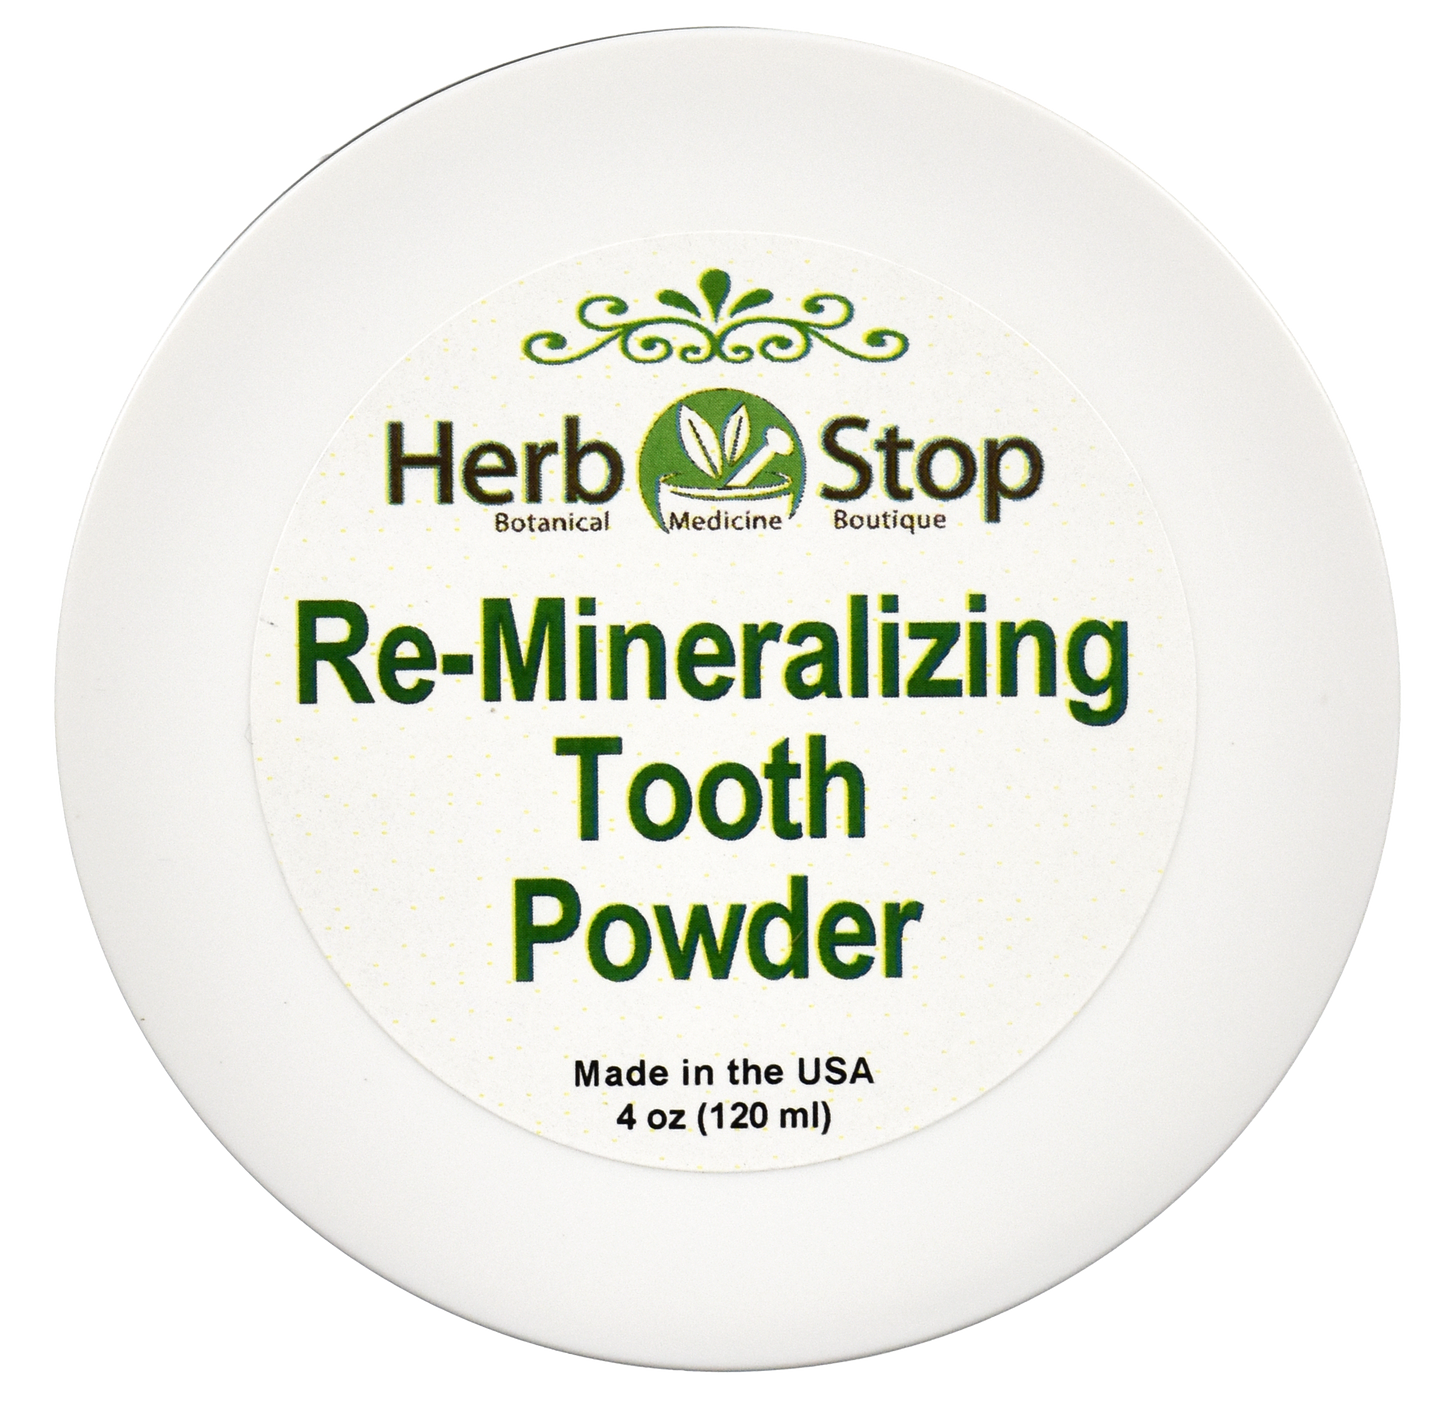 Re-Mineralizing Tooth Powder Top of Jar